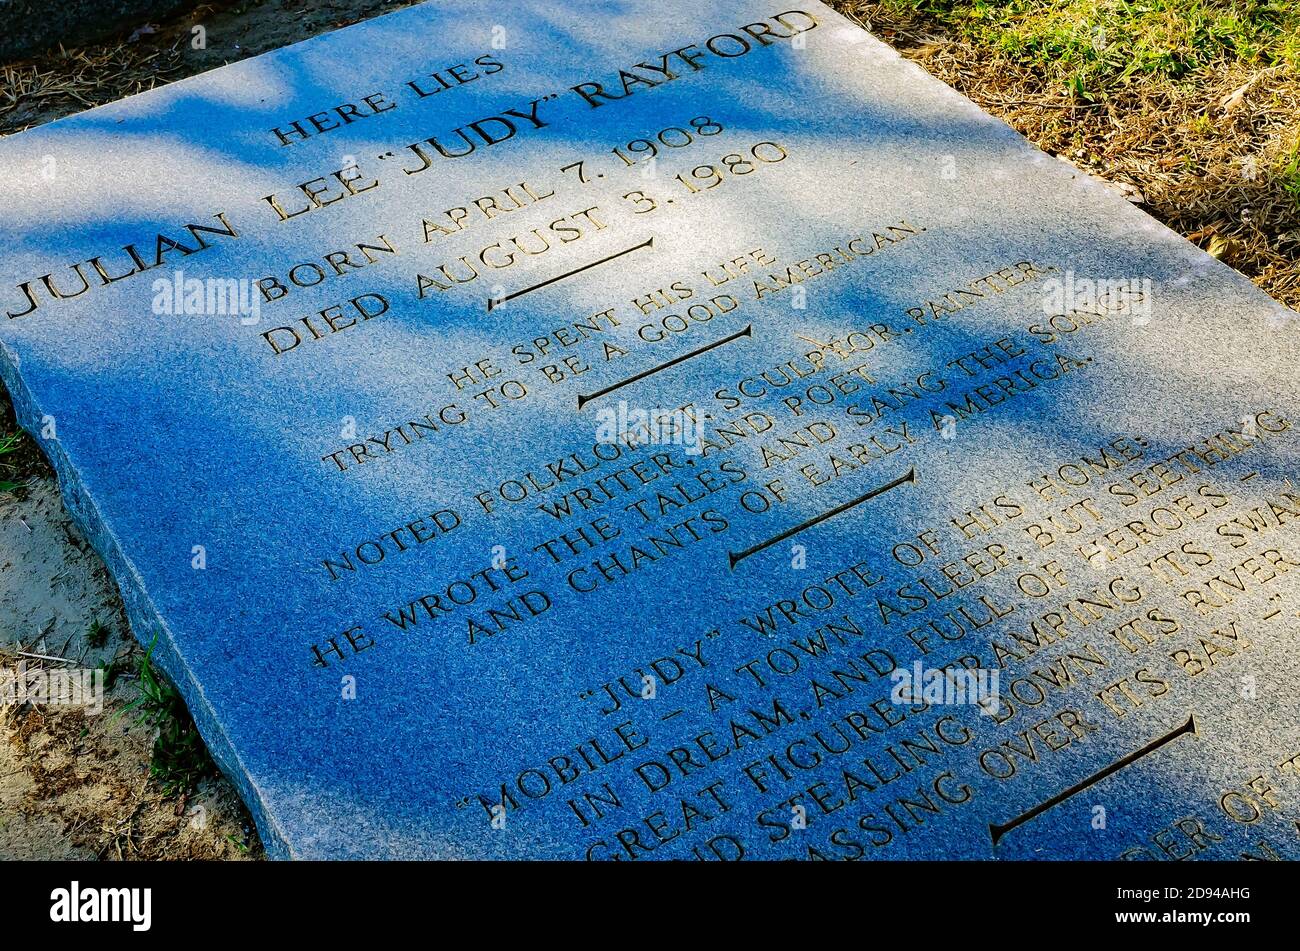 Julian Lee “Judy” Rayford’s grave is pictured in Church Street Graveyard, Oct. 31, 2020, in Mobile, Alabama. The cemetery was founded in 1819. Stock Photo